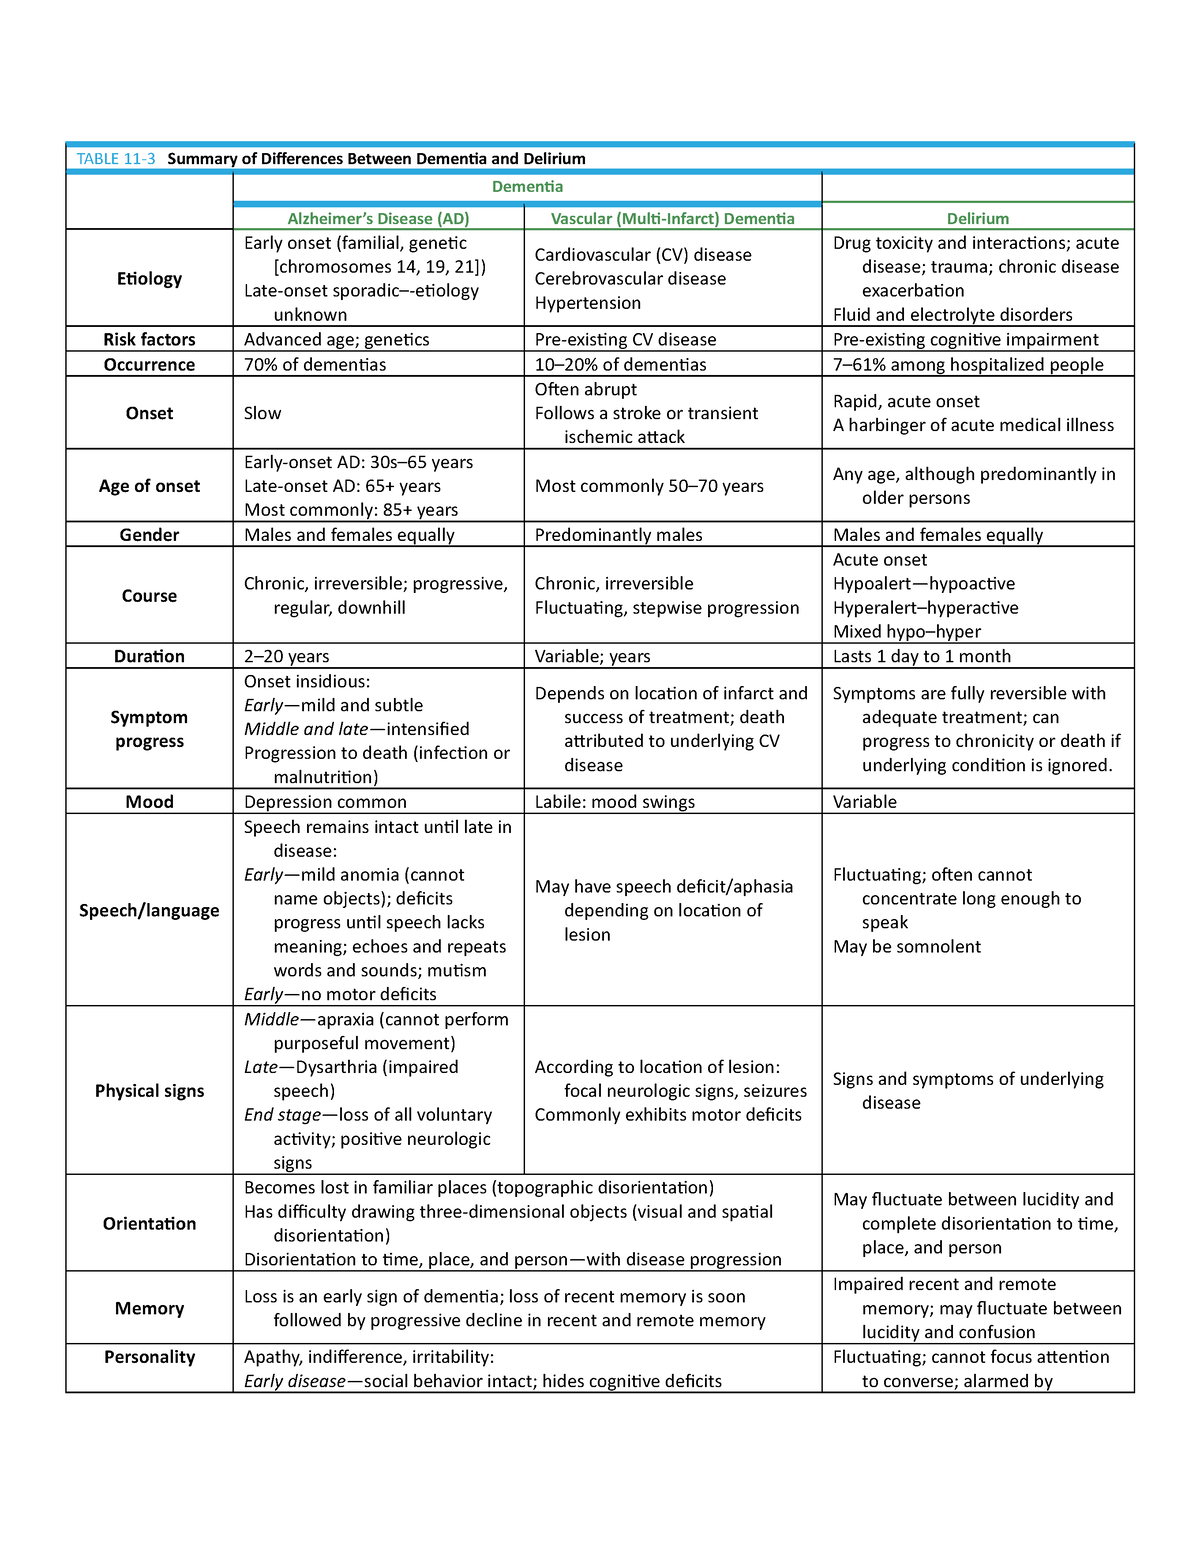 Summary of Differences Between Dementia and Delirium - TABLE 11-3 ...